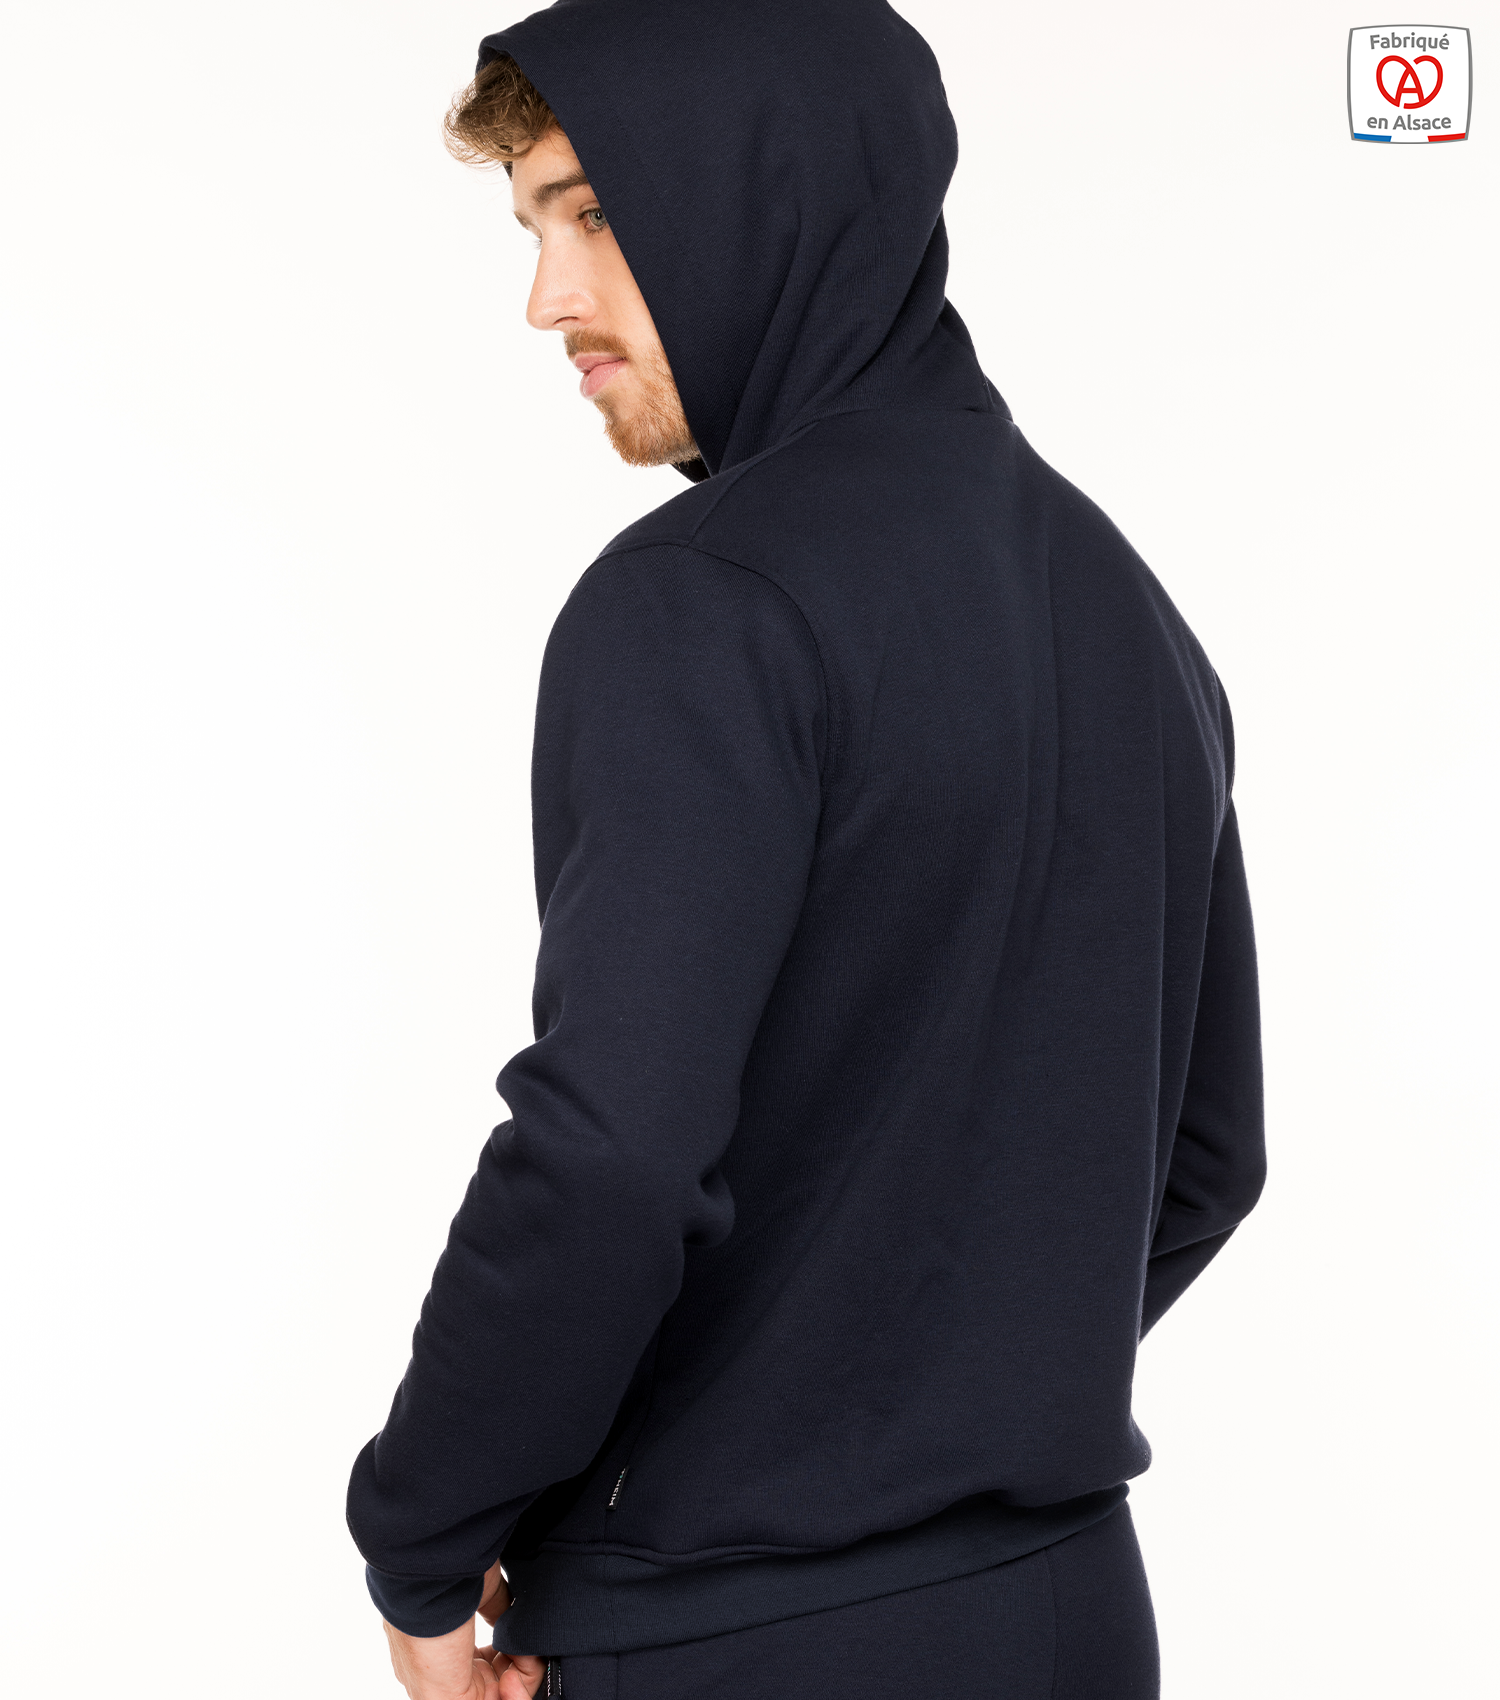 theim-hoodie-dos-made-in-france-1500-x-1700px